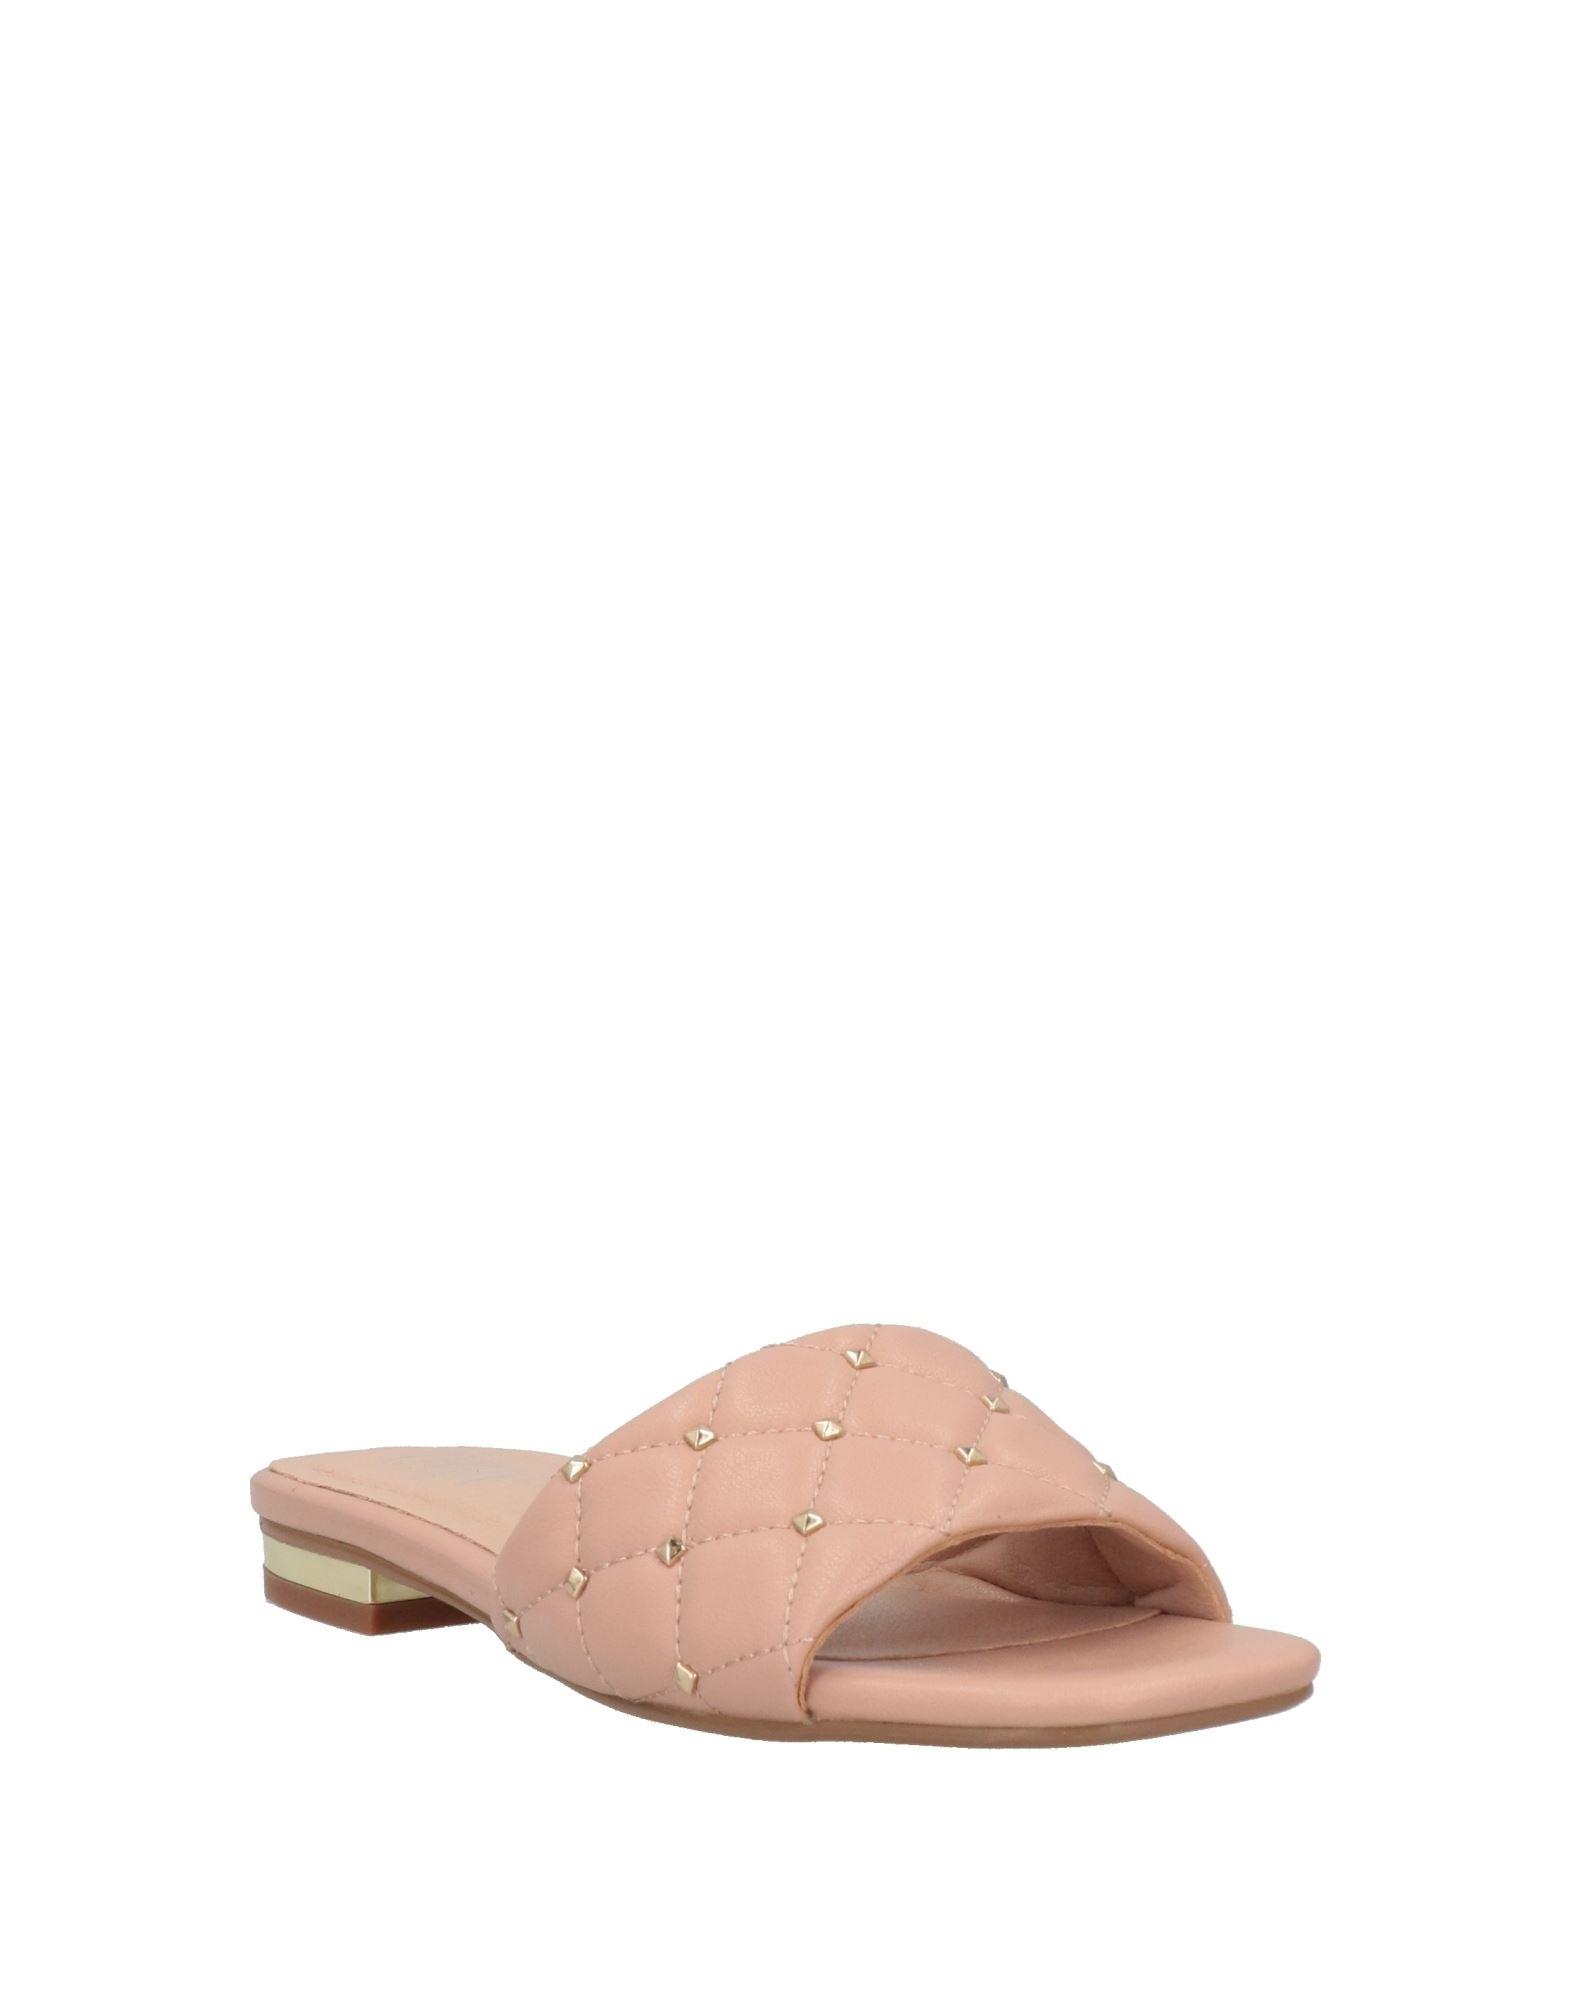 Ovye' By Cristina Lucchi Sandals in Pink | Lyst